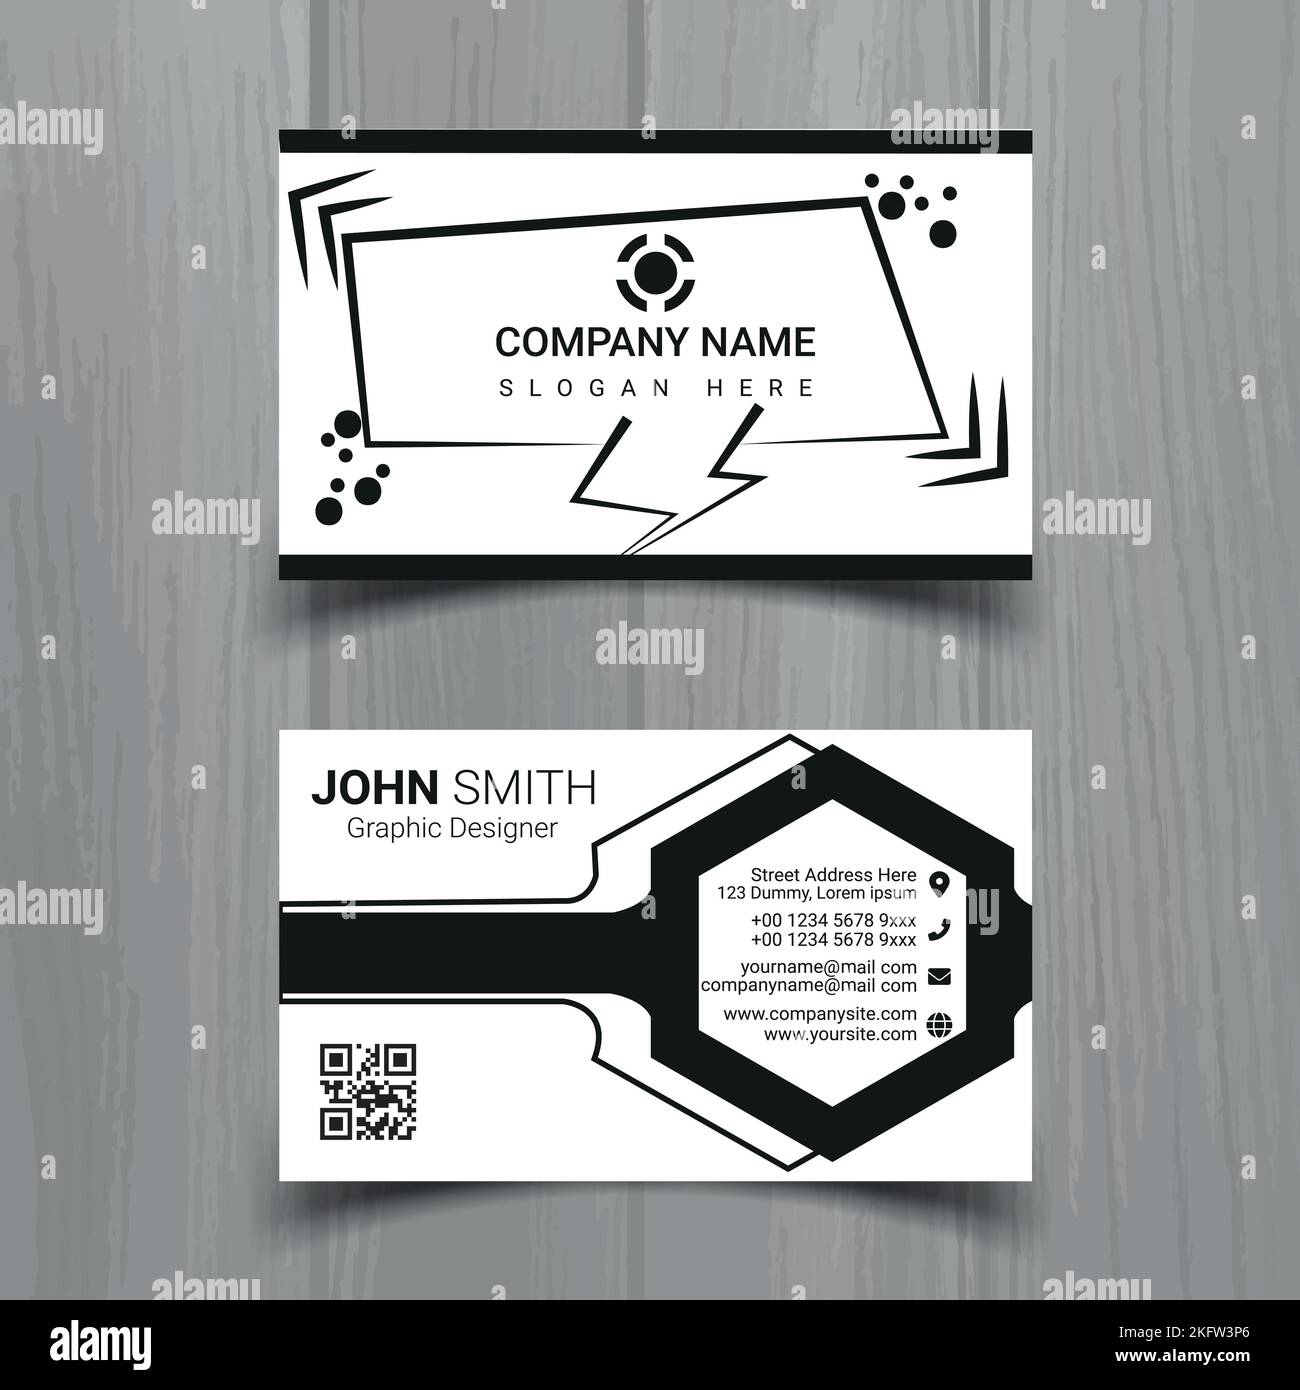 Professional business card design template Stock Vector